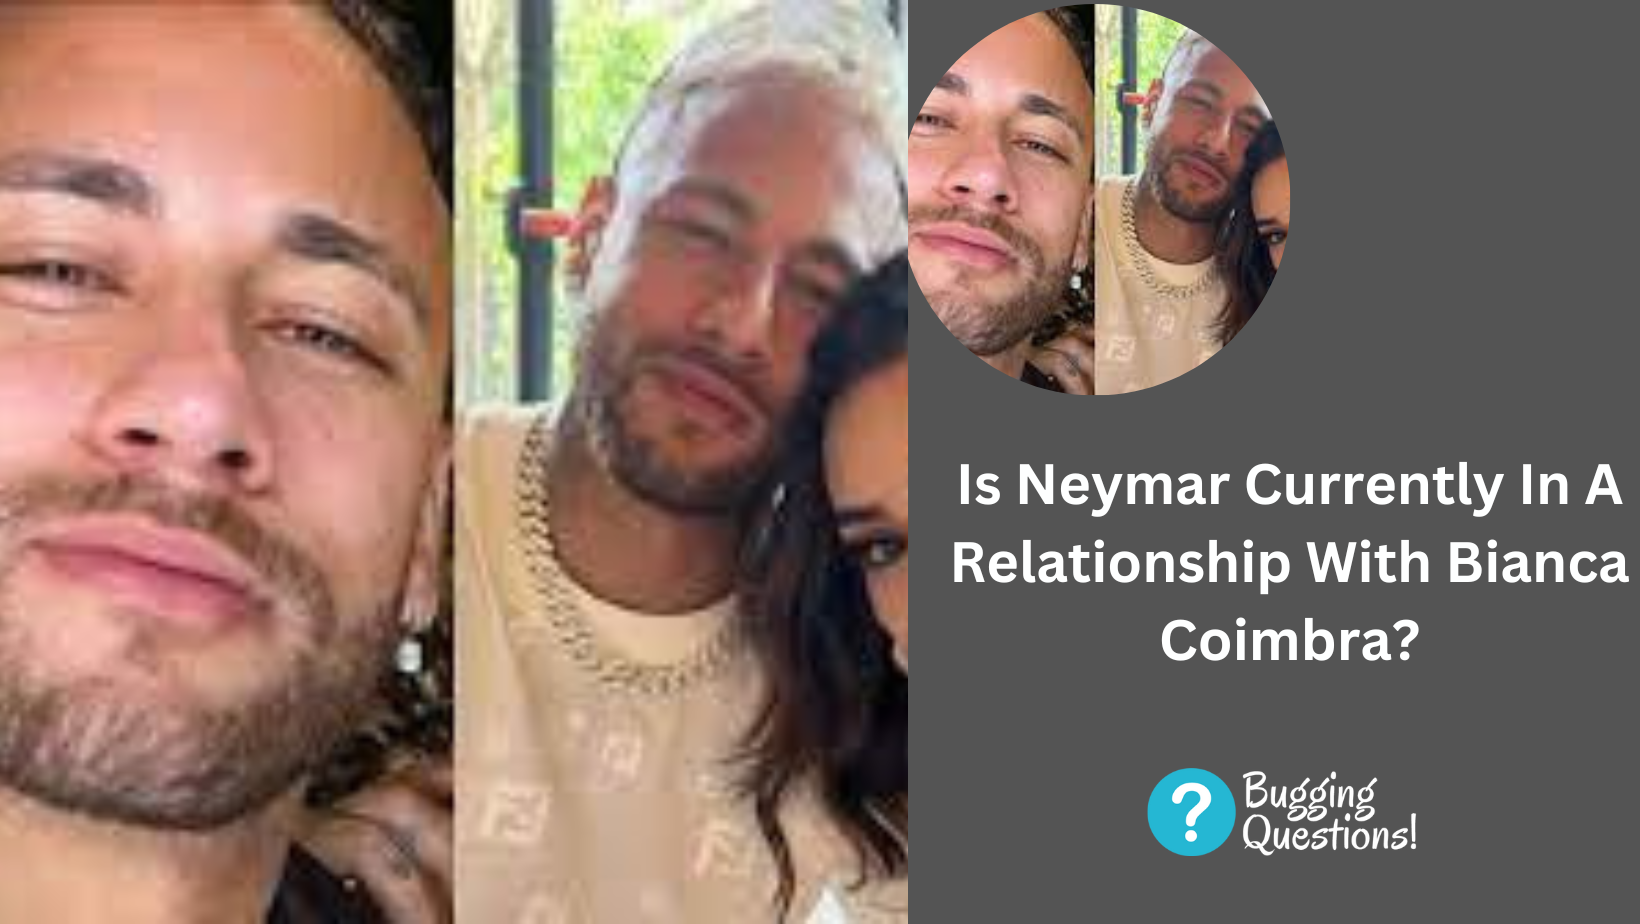 Is Neymar Currently In A Relationship With Bianca Coimbra?